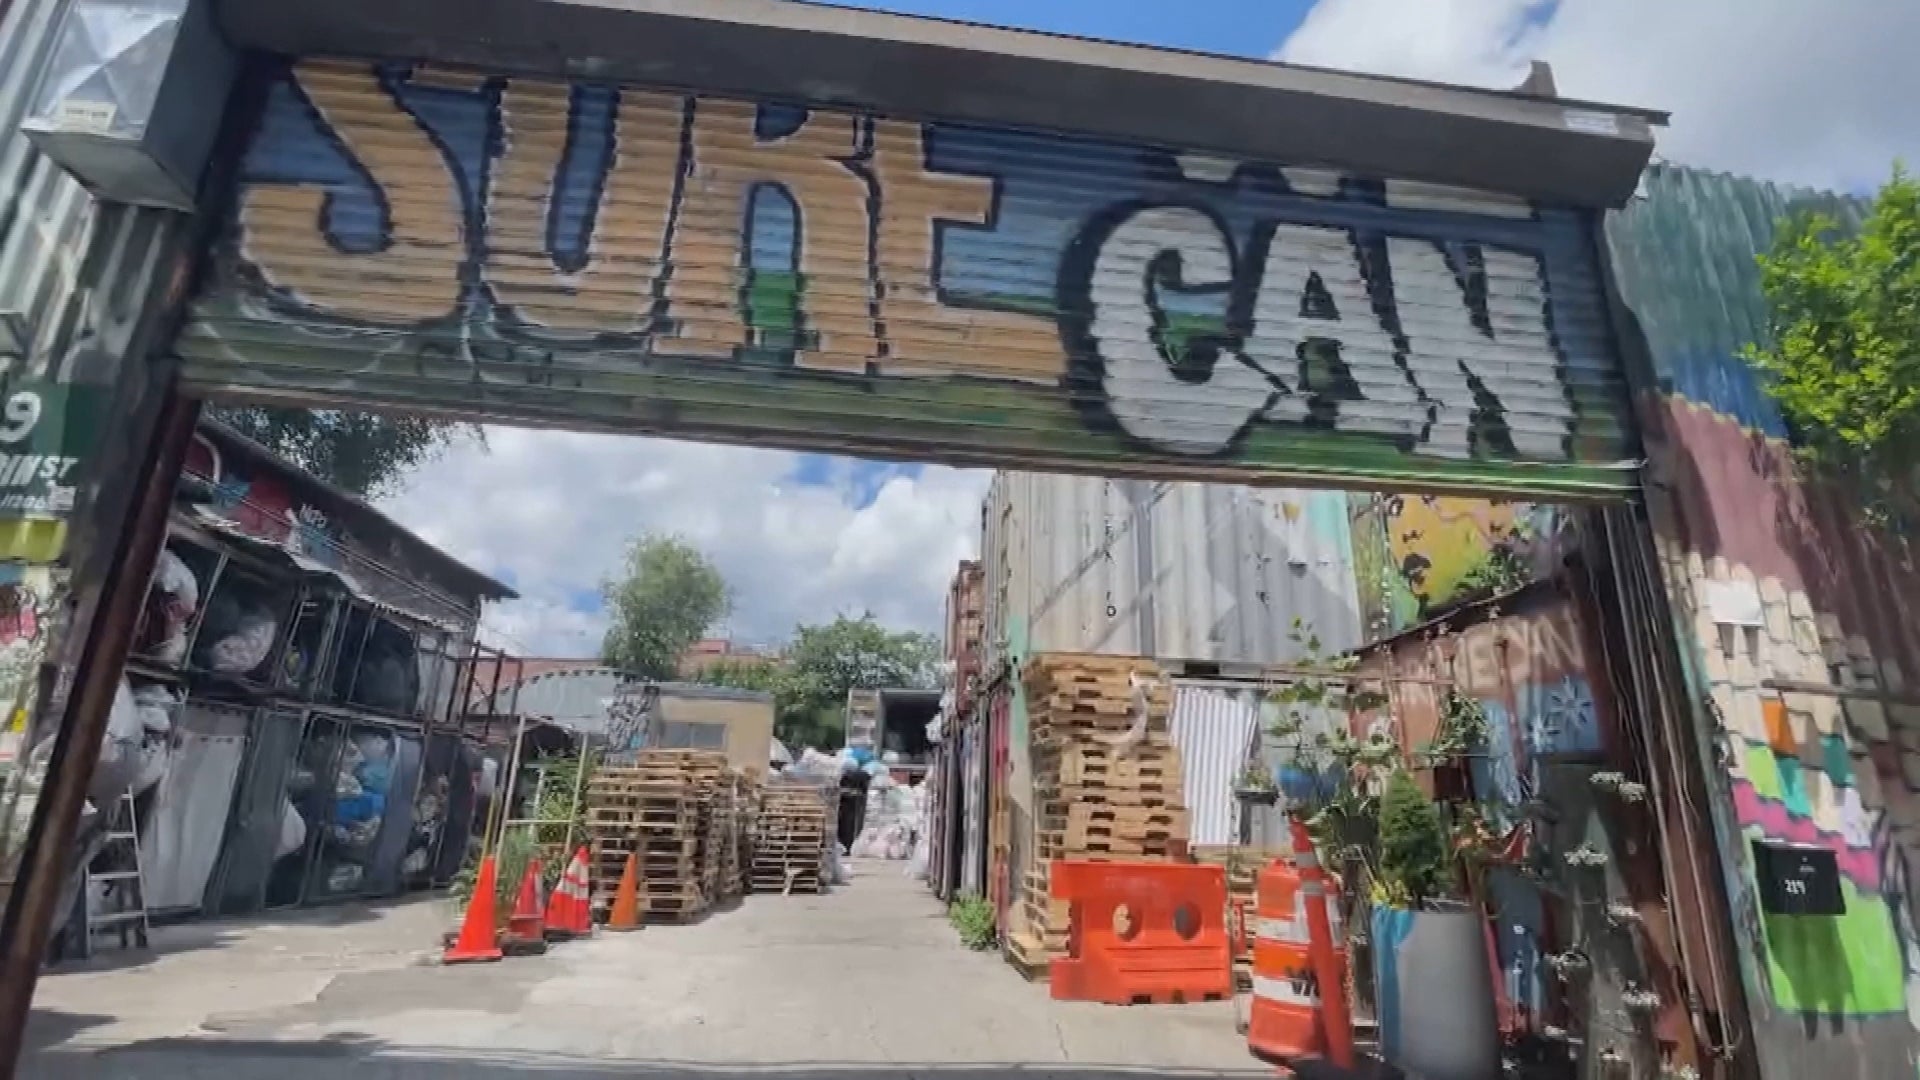 Sure We Can, a Brooklyn nonprofit, redeems about one million cans and bottles each month, keeping them out of landfills.